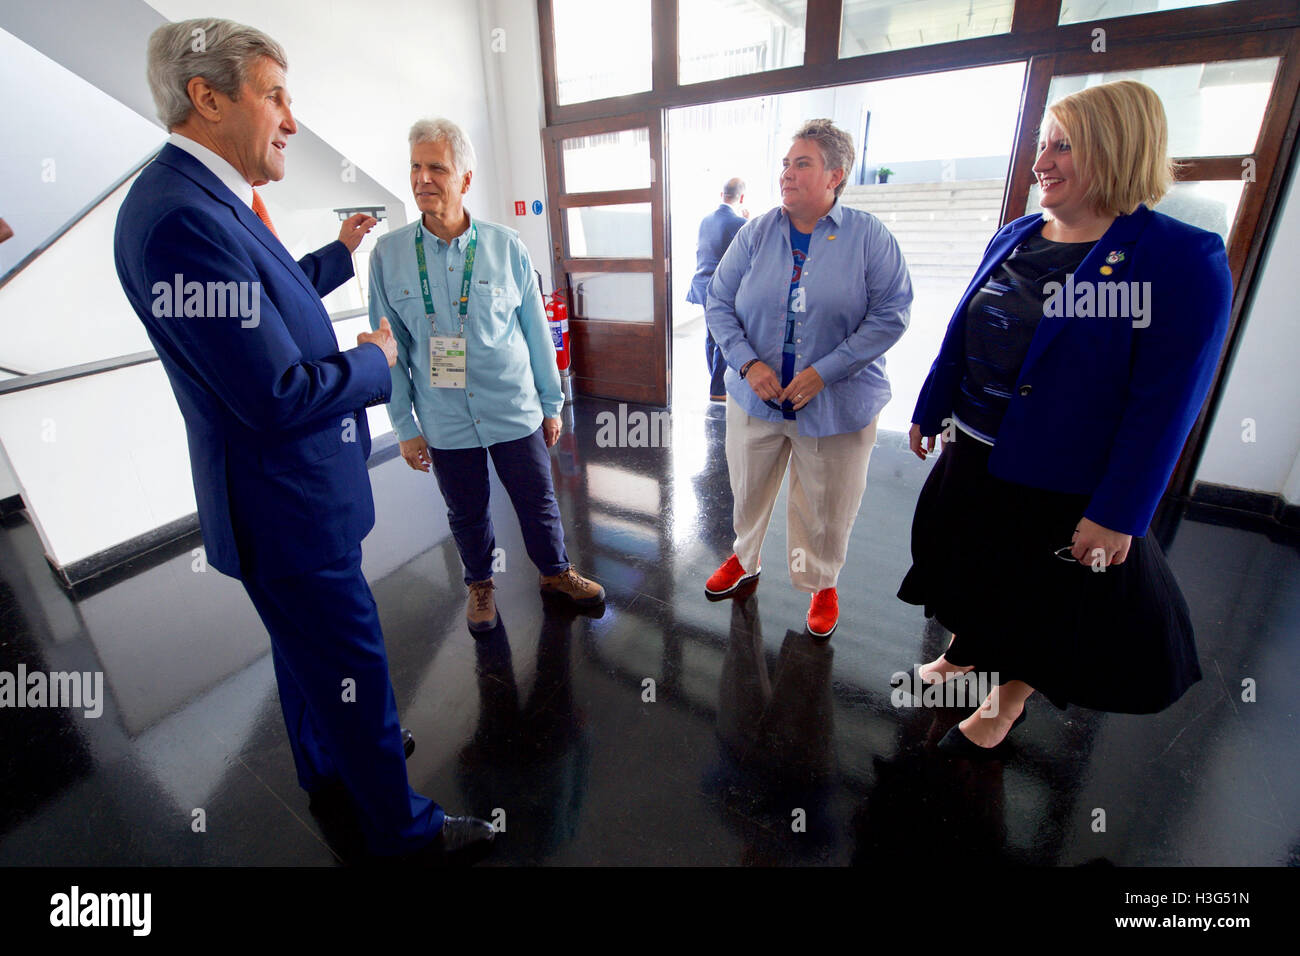 U.S. Secretary of State John Kerry meets his  fellow U.S. Presidential Delegation members - Olympic gold medalist Mark Spitz, White House Visitors Office Director Ellie Schafer, and White House Deputy Communications Director Liz Allen - as they assemble at the Brazilian Naval Academy in Rio de Janiero, Brazil, on August 5, 2016, before they meet members of Team USA training at the facility. Stock Photo